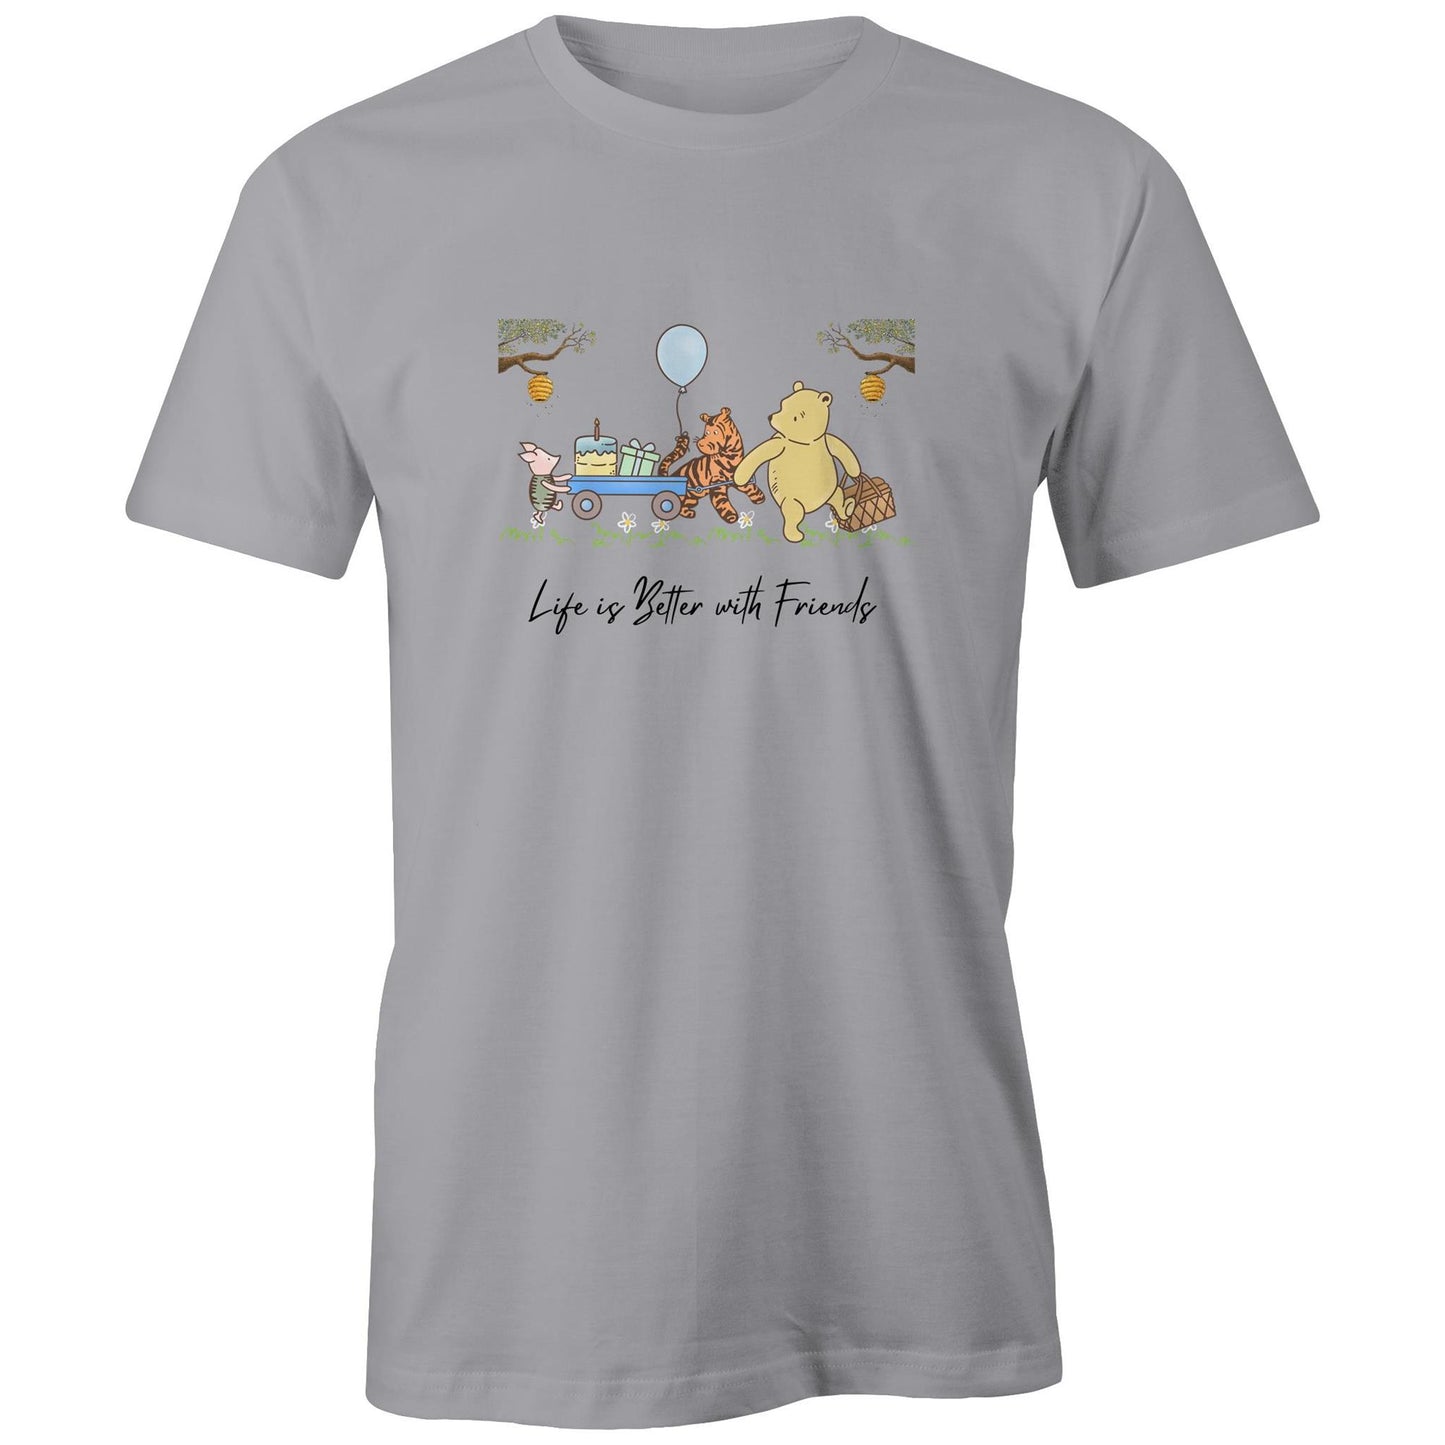 Pooh Bear and Friends- Men's Classic Tee